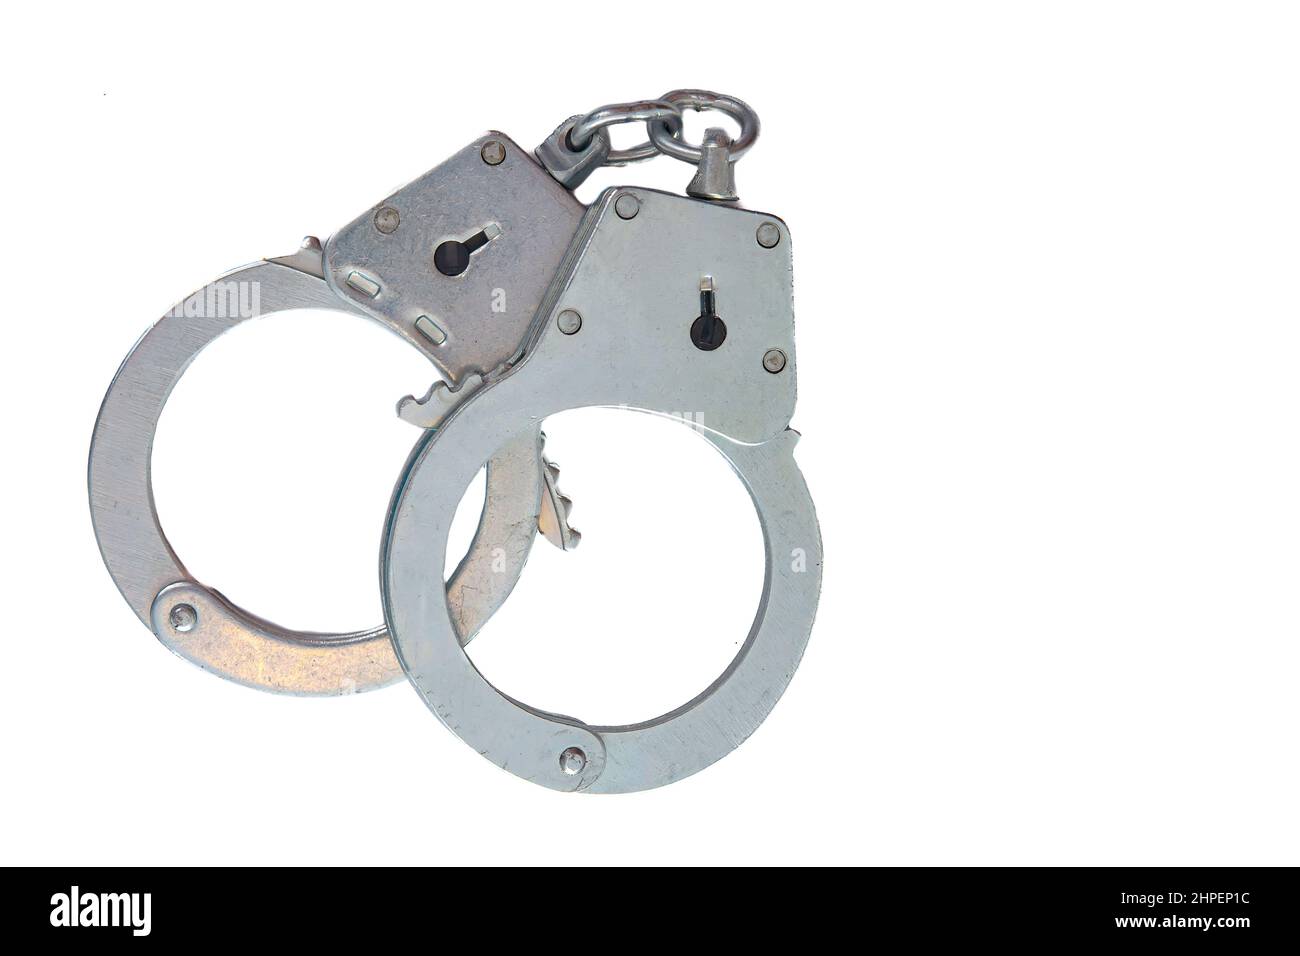 Metal handcuffs on a white isolated background Stock Photo